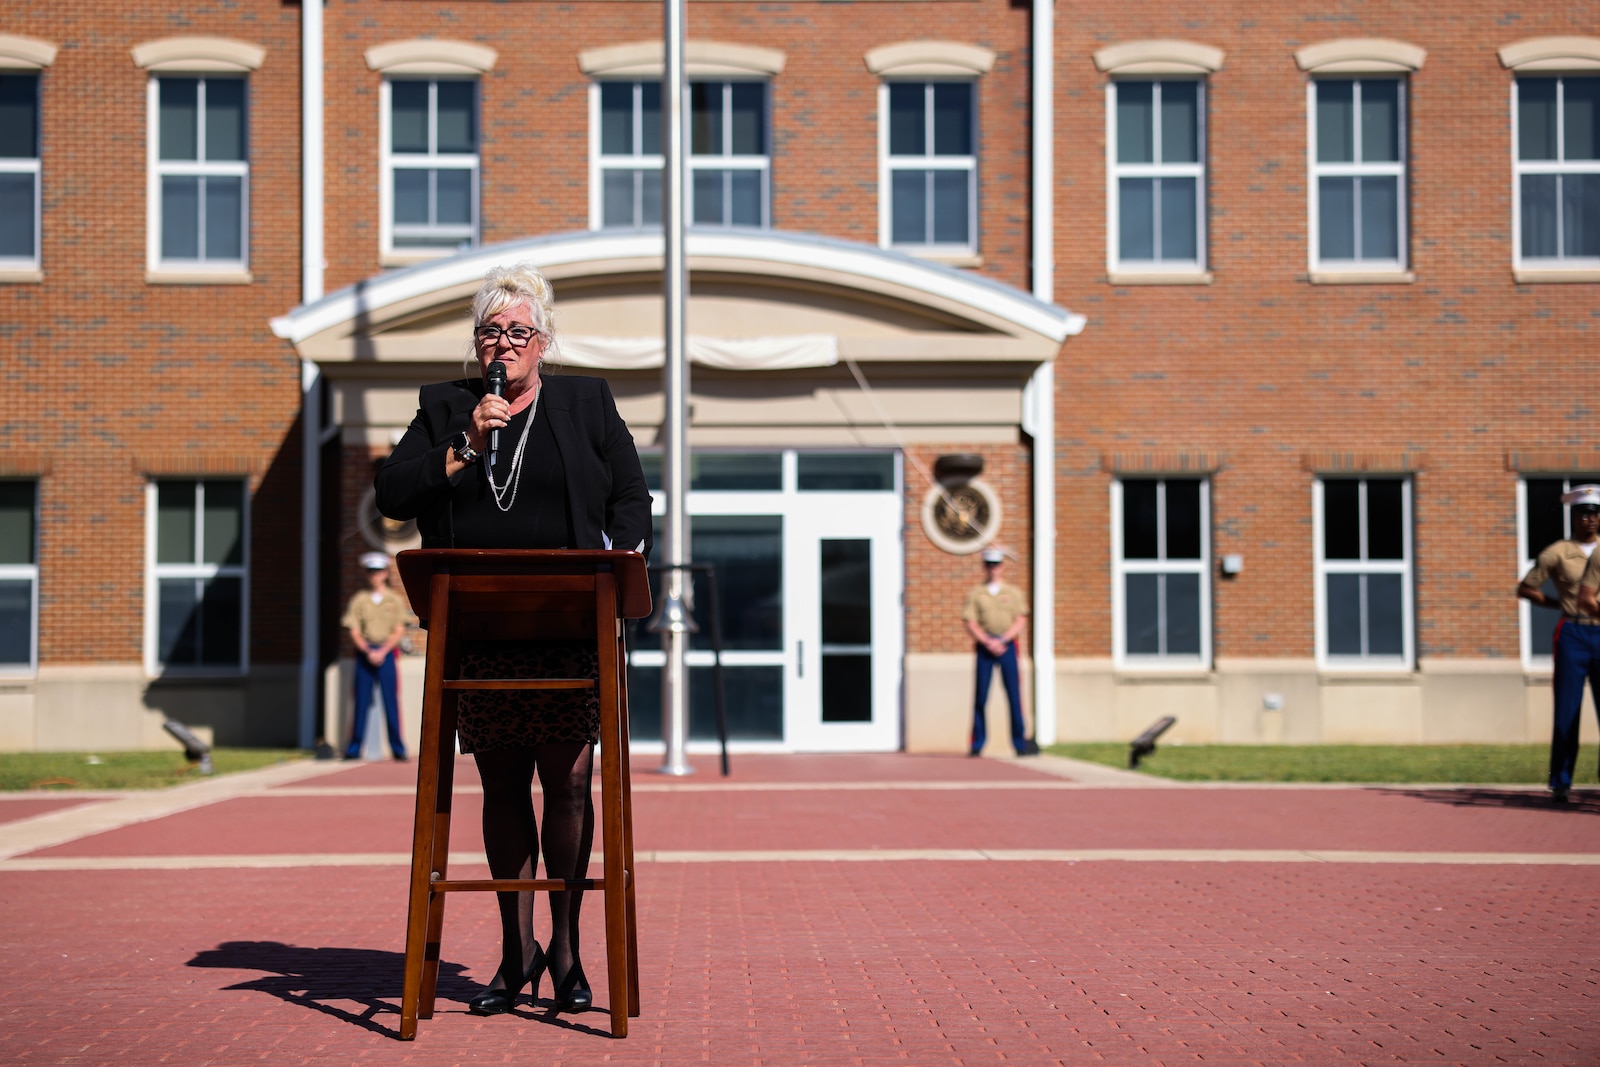 Teresa McMaugh, former U.S Marine Corps Cpl. Robert V. McMaugh’s sister, addresses attendees of the dedication and naming ceremony for McMaugh Hall on Marine Corps Base Quantico, April 18, 2023. This ceremony marks the 40th anniversary of the bombing of the U.S. Embassy in Beirut, in which McMaugh was killed in the explosion. (U.S. Marine Corps photo by Lance Cpl. David Brandes)